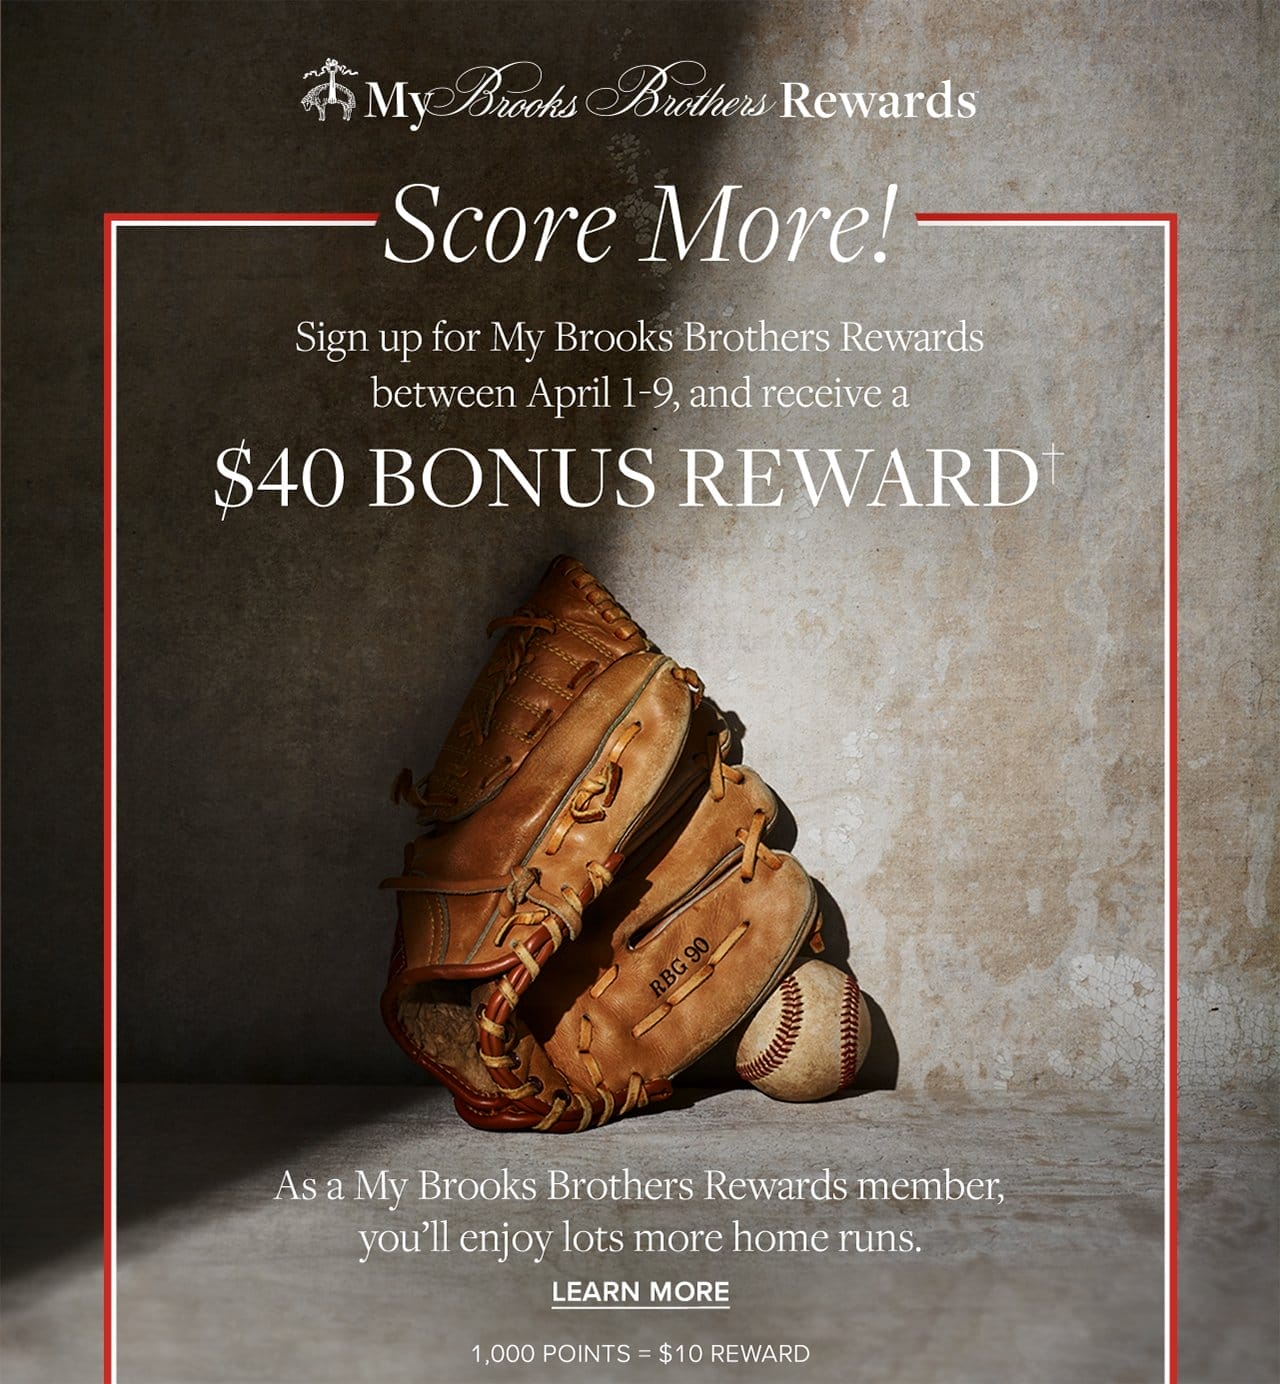 My Brooks Brothers Rewards Score More! Sign up for My Brooks Brothers Rewards between April 1-9, and receive a \\$40 Bonus Reward As a My Brooks Brothers Rewrads member, you'll enjoy lots more home runs. Learn More 1,000 Points = \\$10 Reward